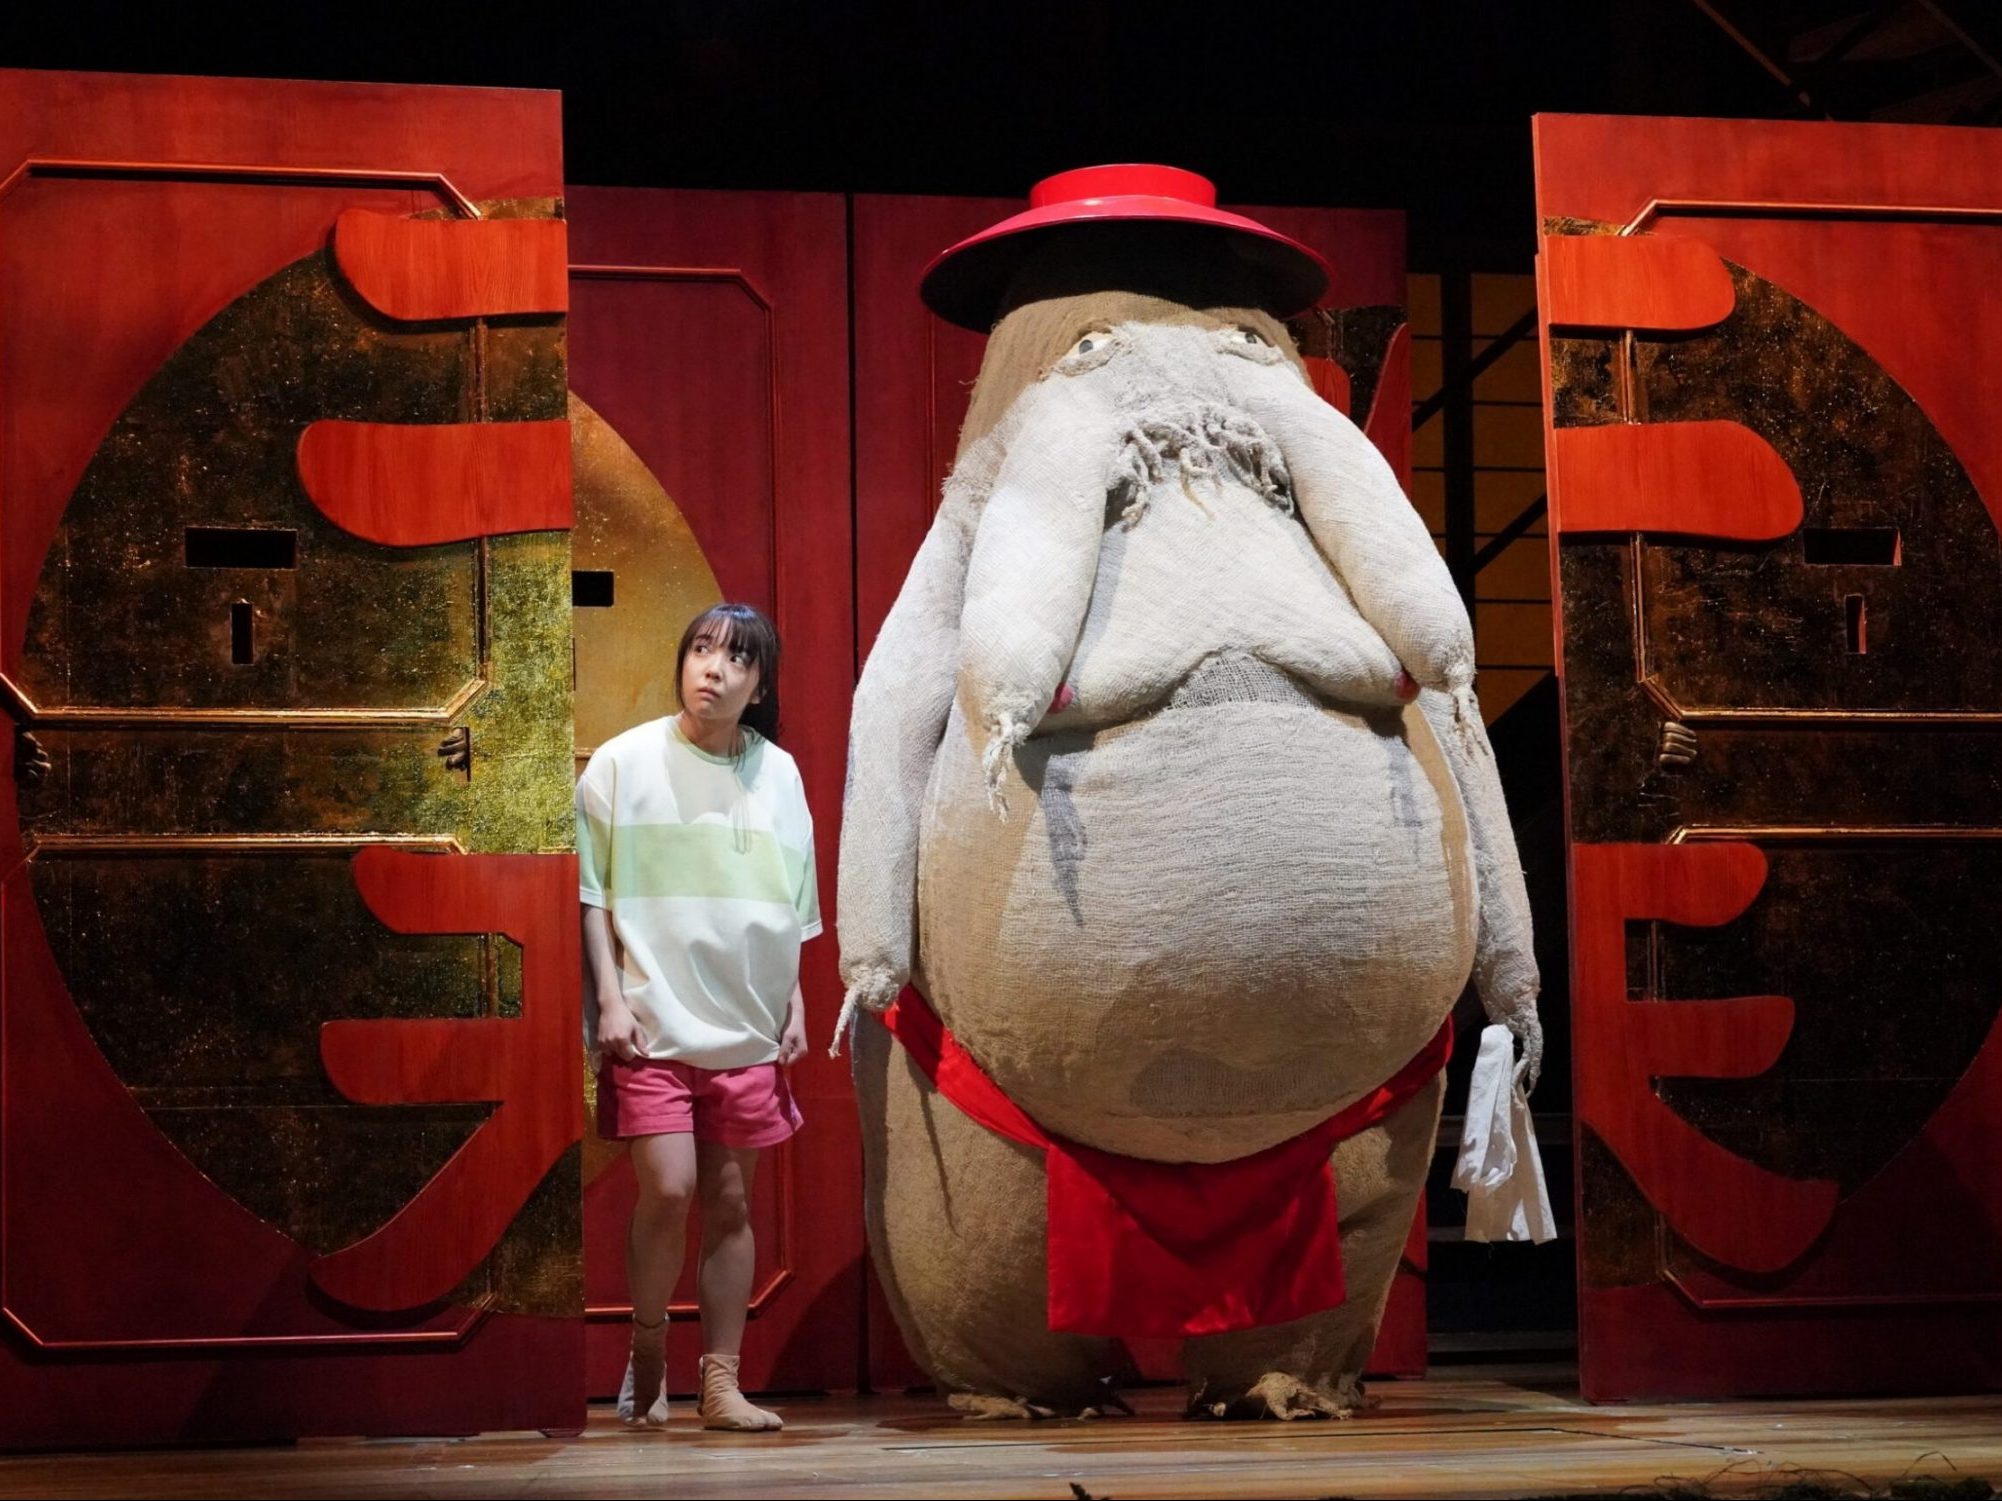 The Spirited Away stage play is coming to American cinemas